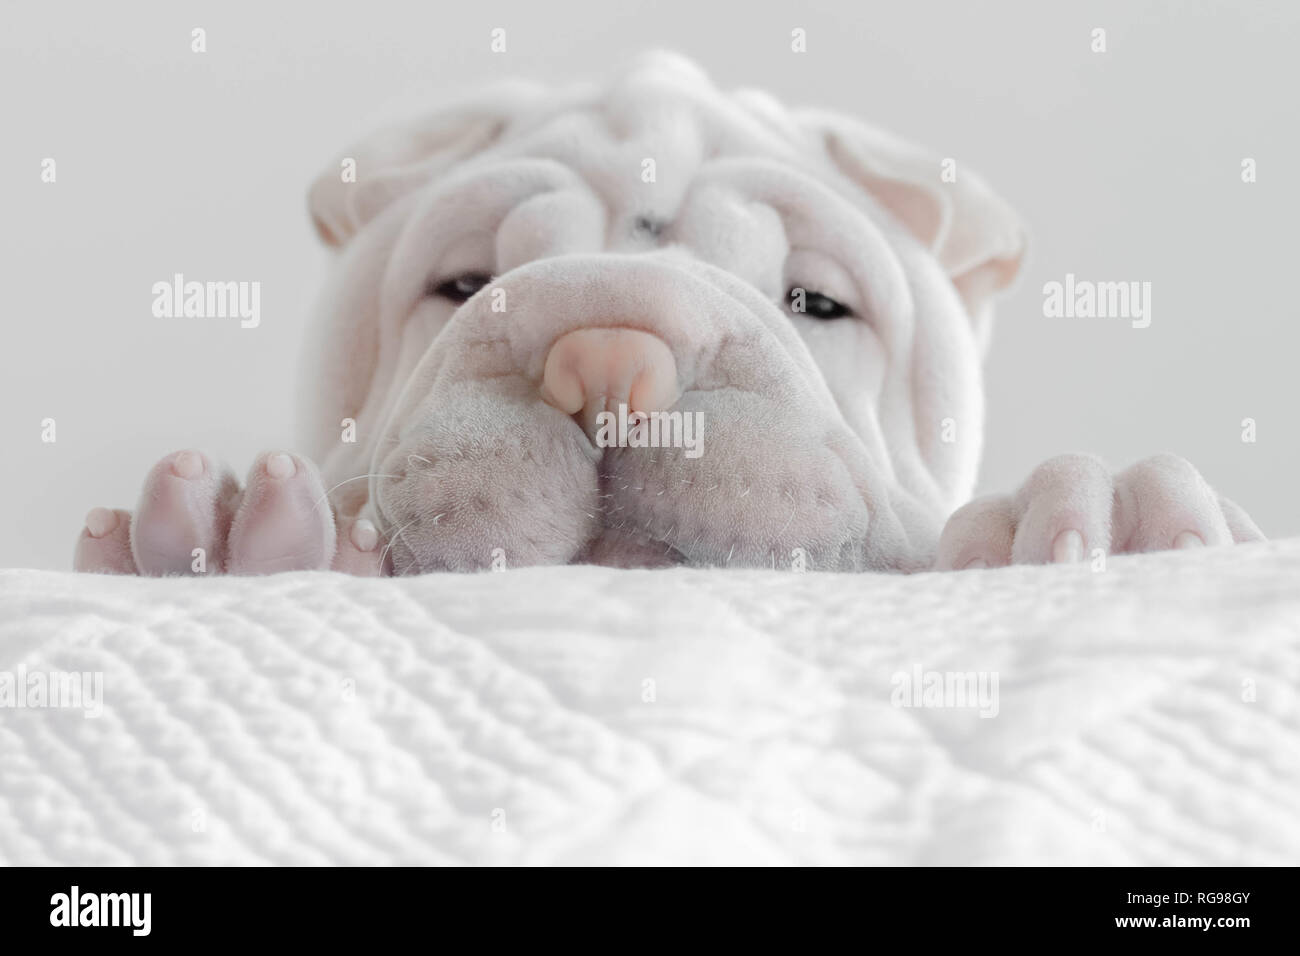 Shar pei puppy peeking over the edge of a bed Stock Photo